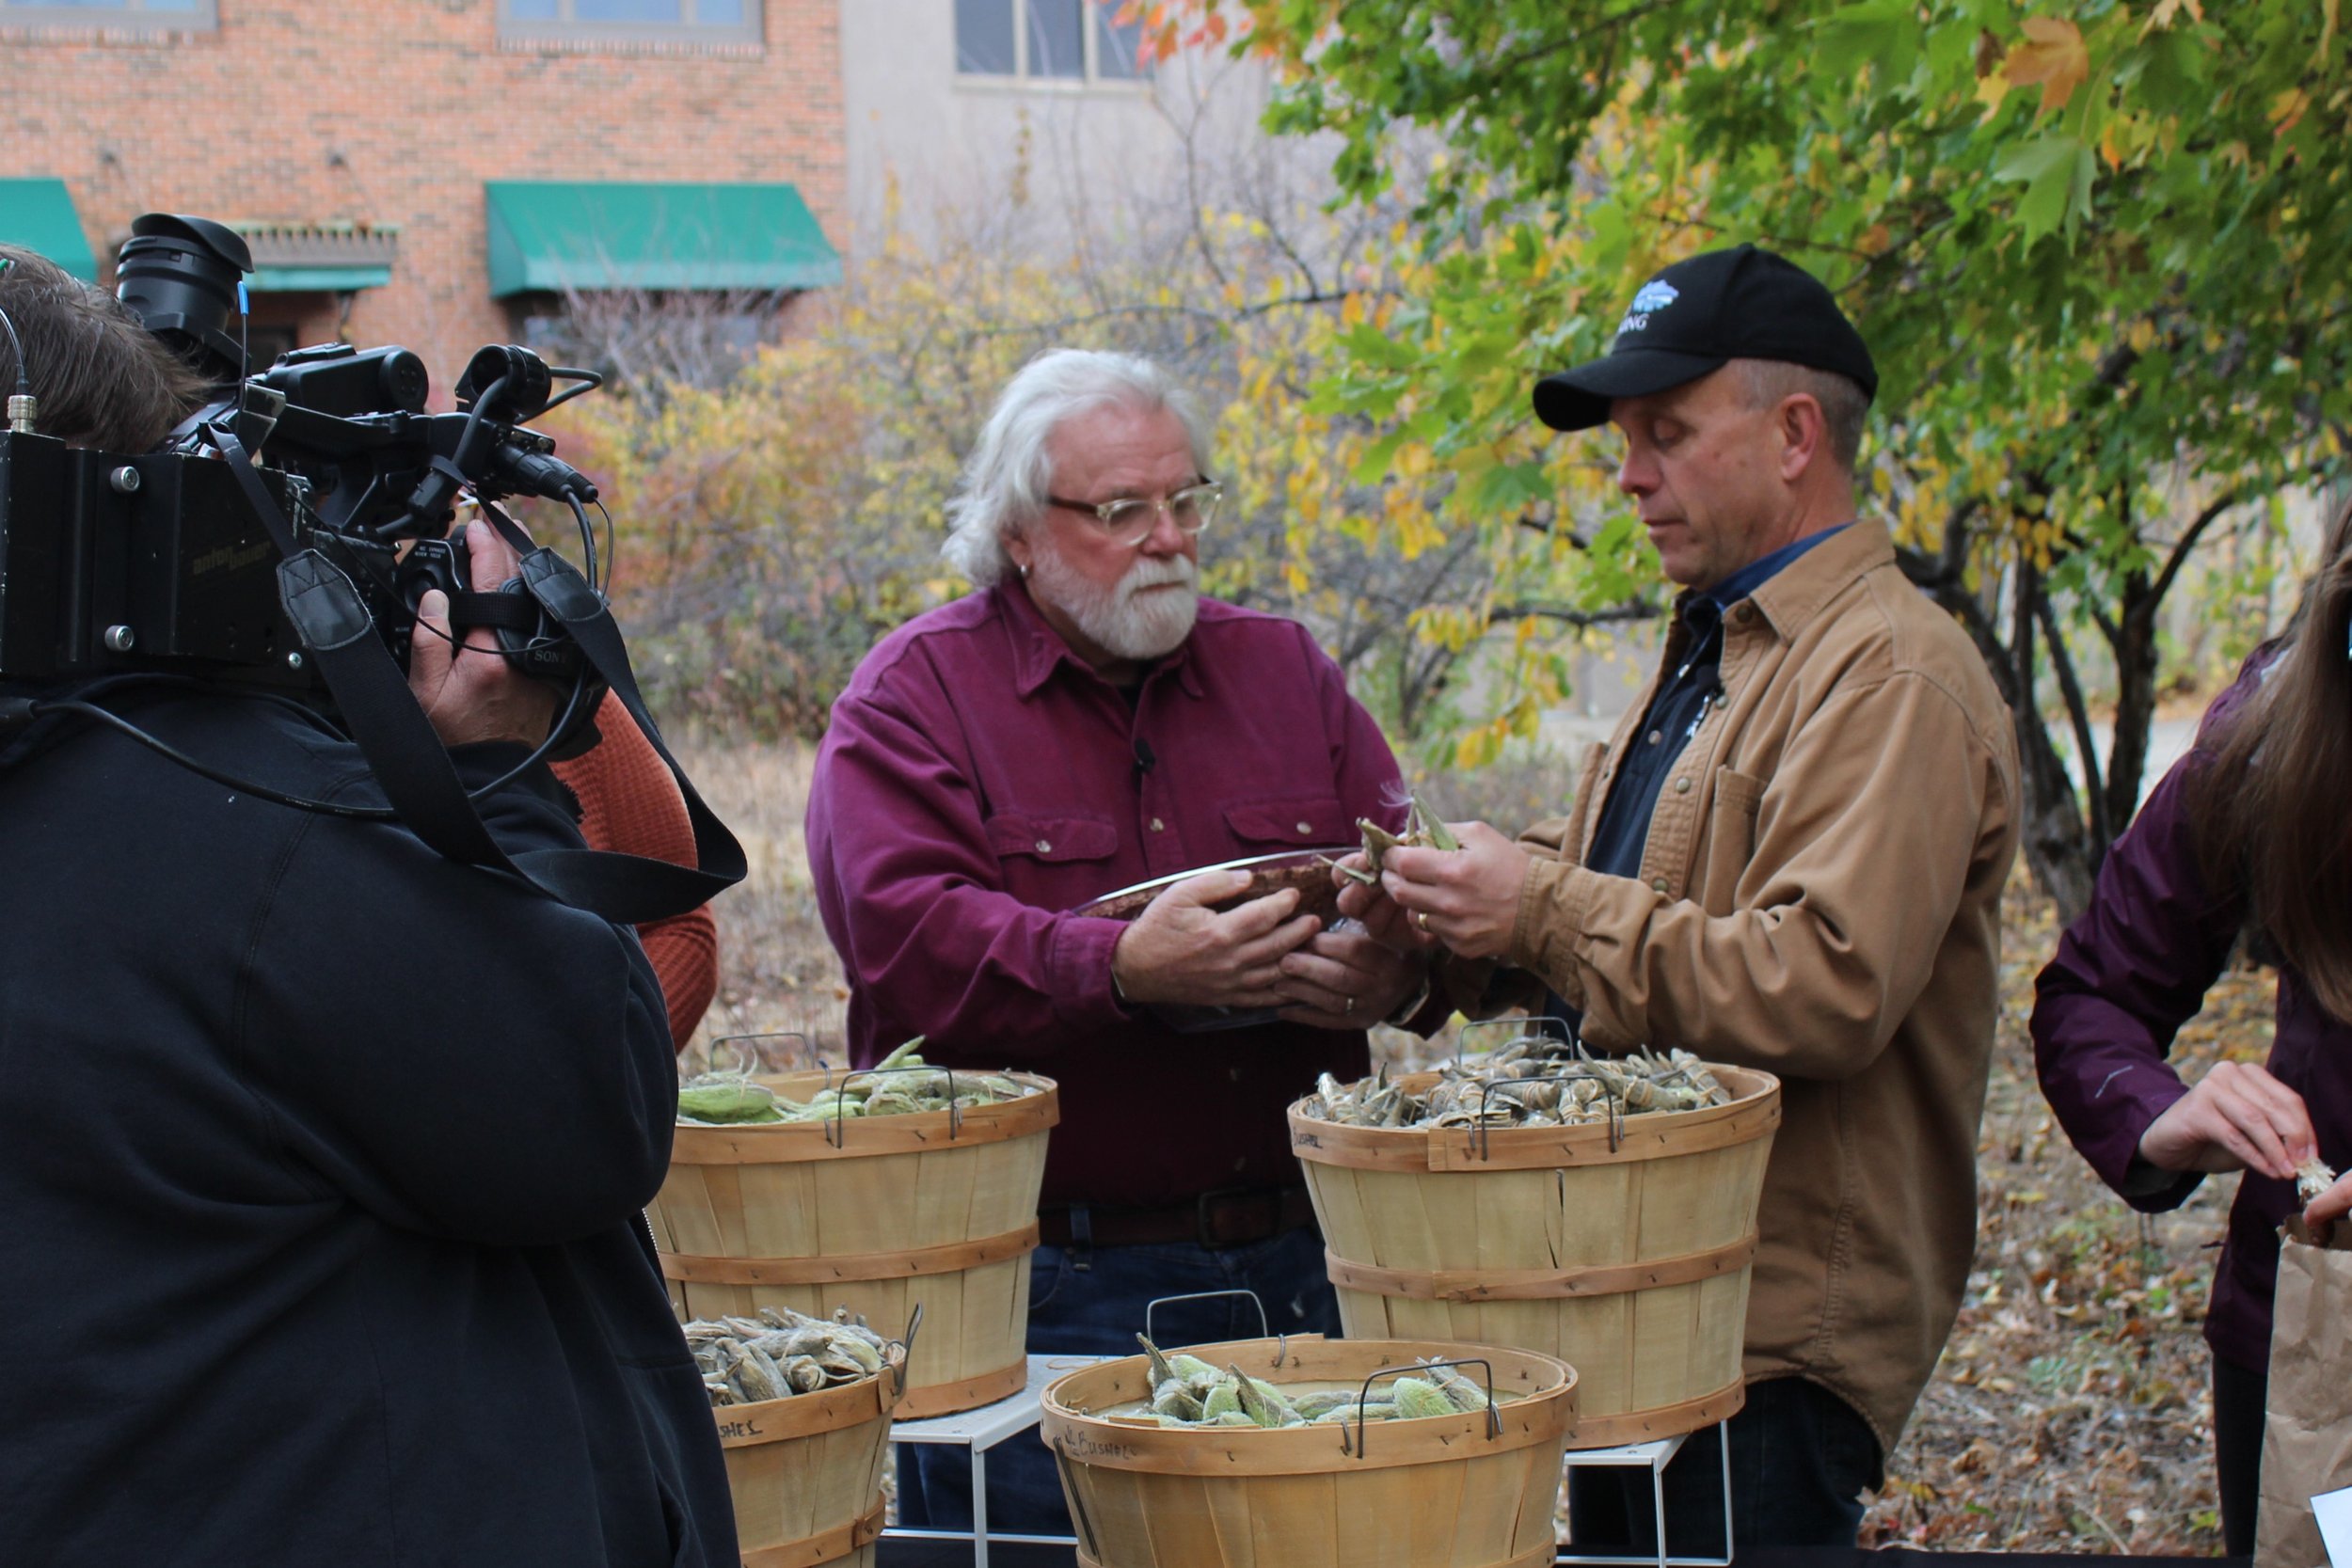 Wiley on air with KARE11's Bobby Jensen and Grow with KARE discussing Greening's efforts to collect and plant milkweed seeds (2017)